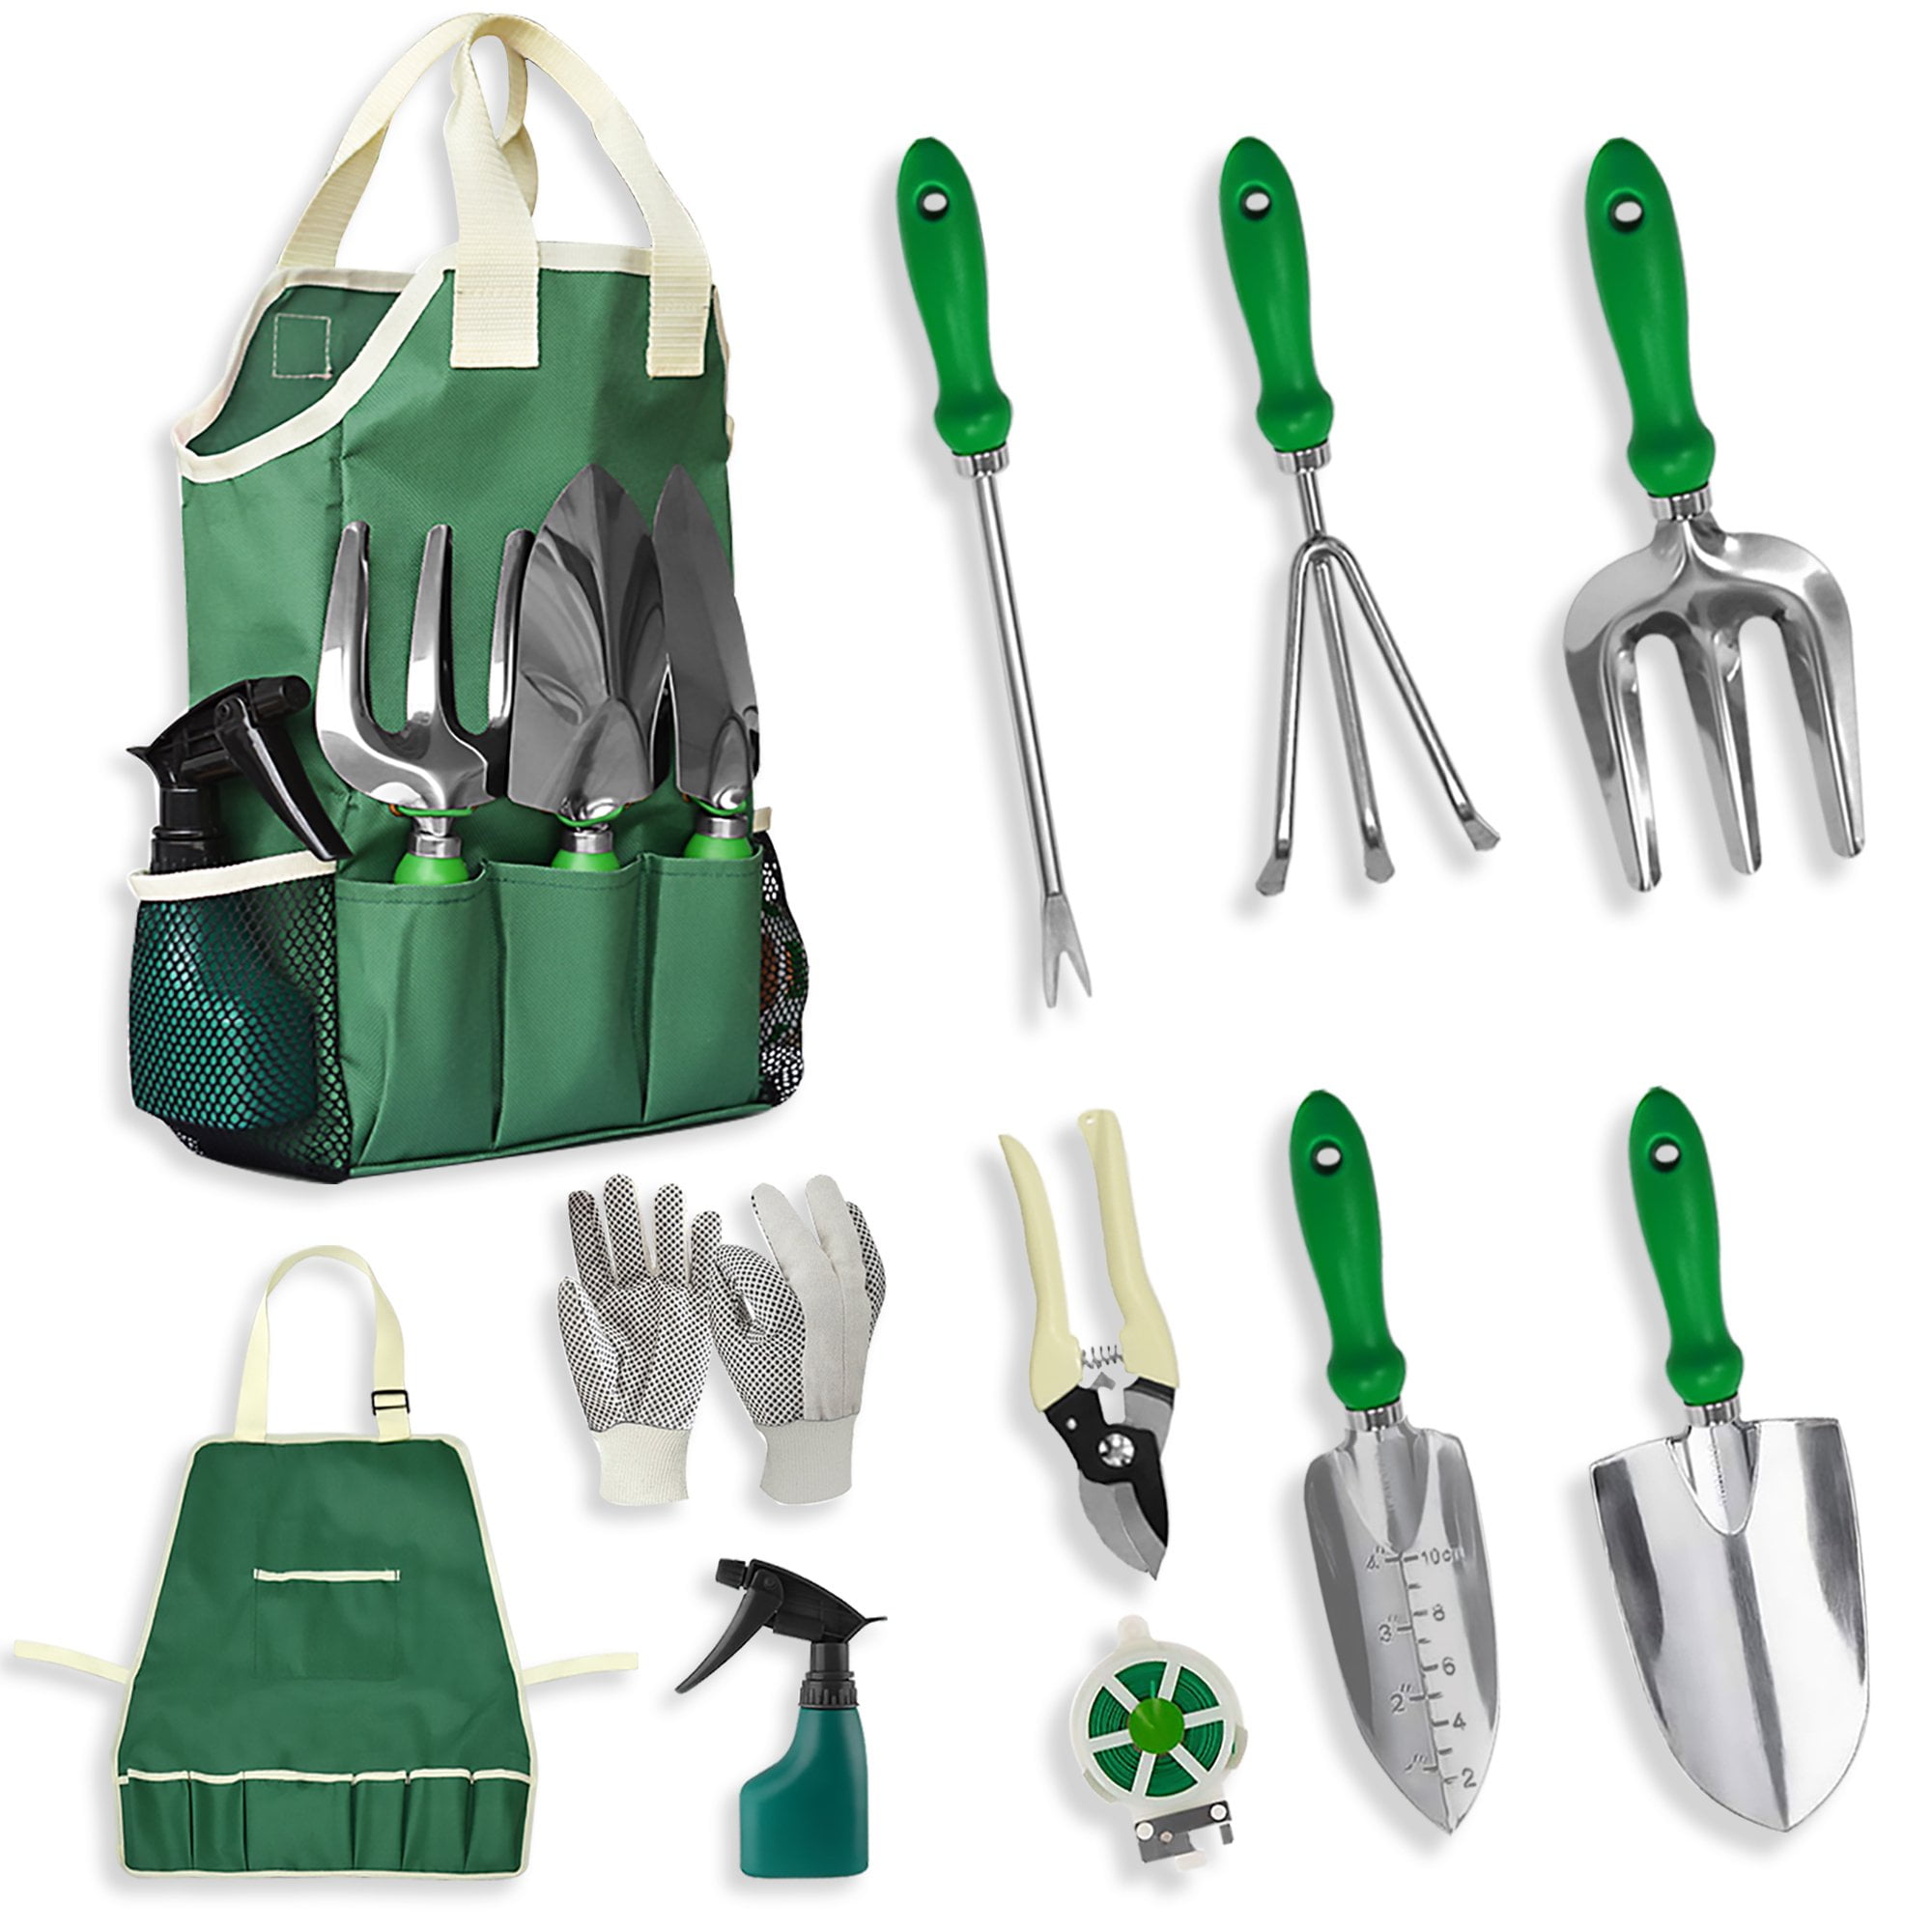 NEW 12 Pieces Garden Hand Tools Set Home Lawn Kit trowel Household Equipment US 